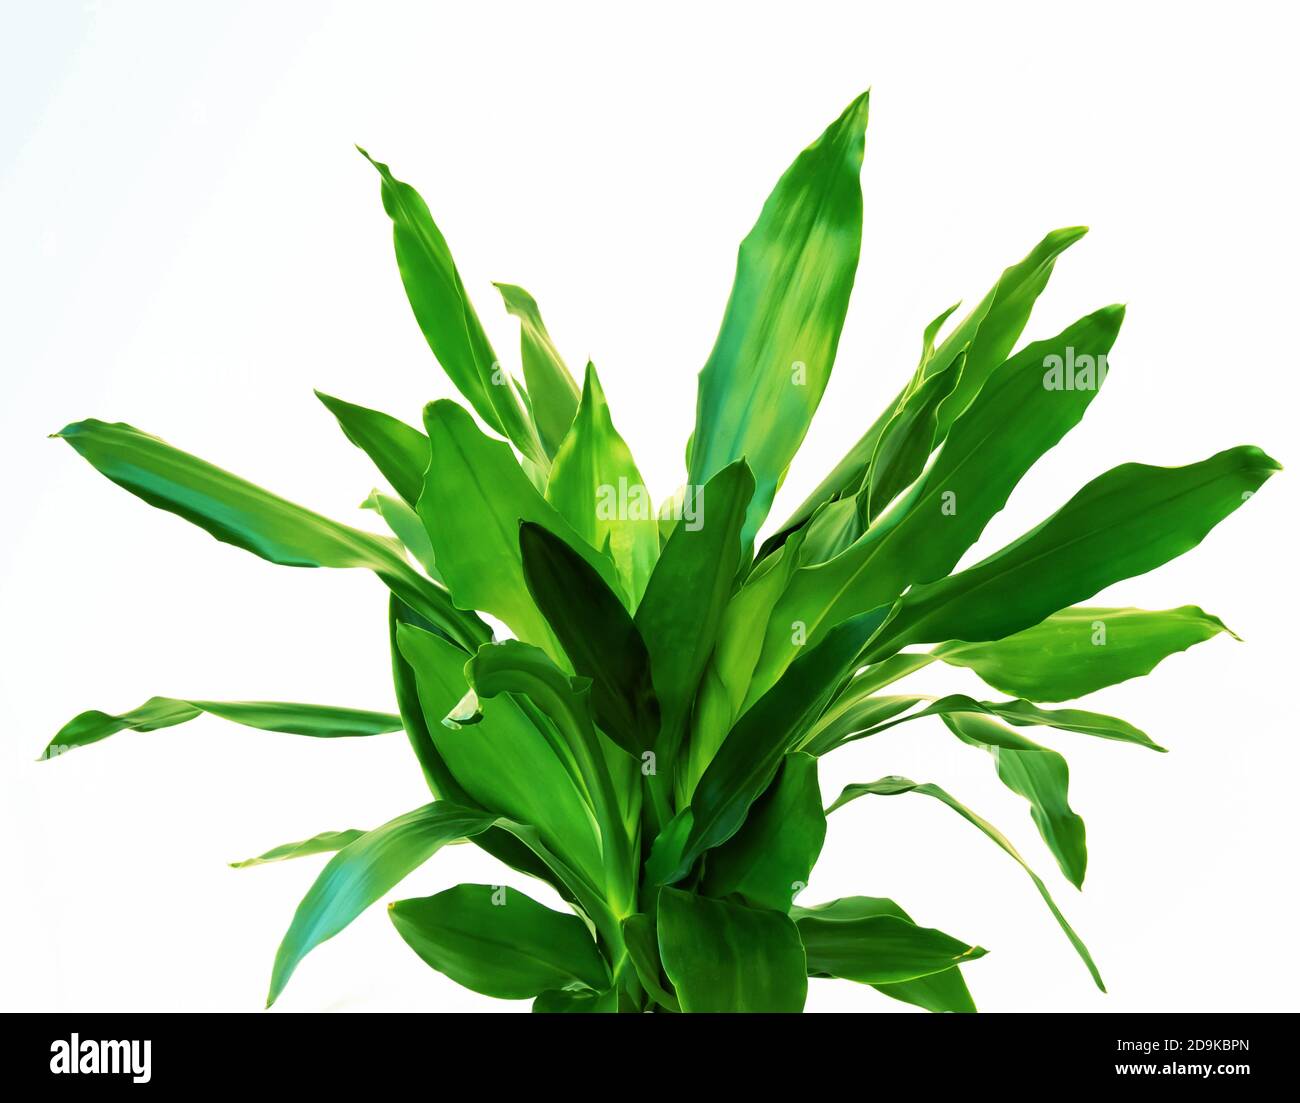 Dracaena Fragrans green leaves close up isolated on white background Stock Photo